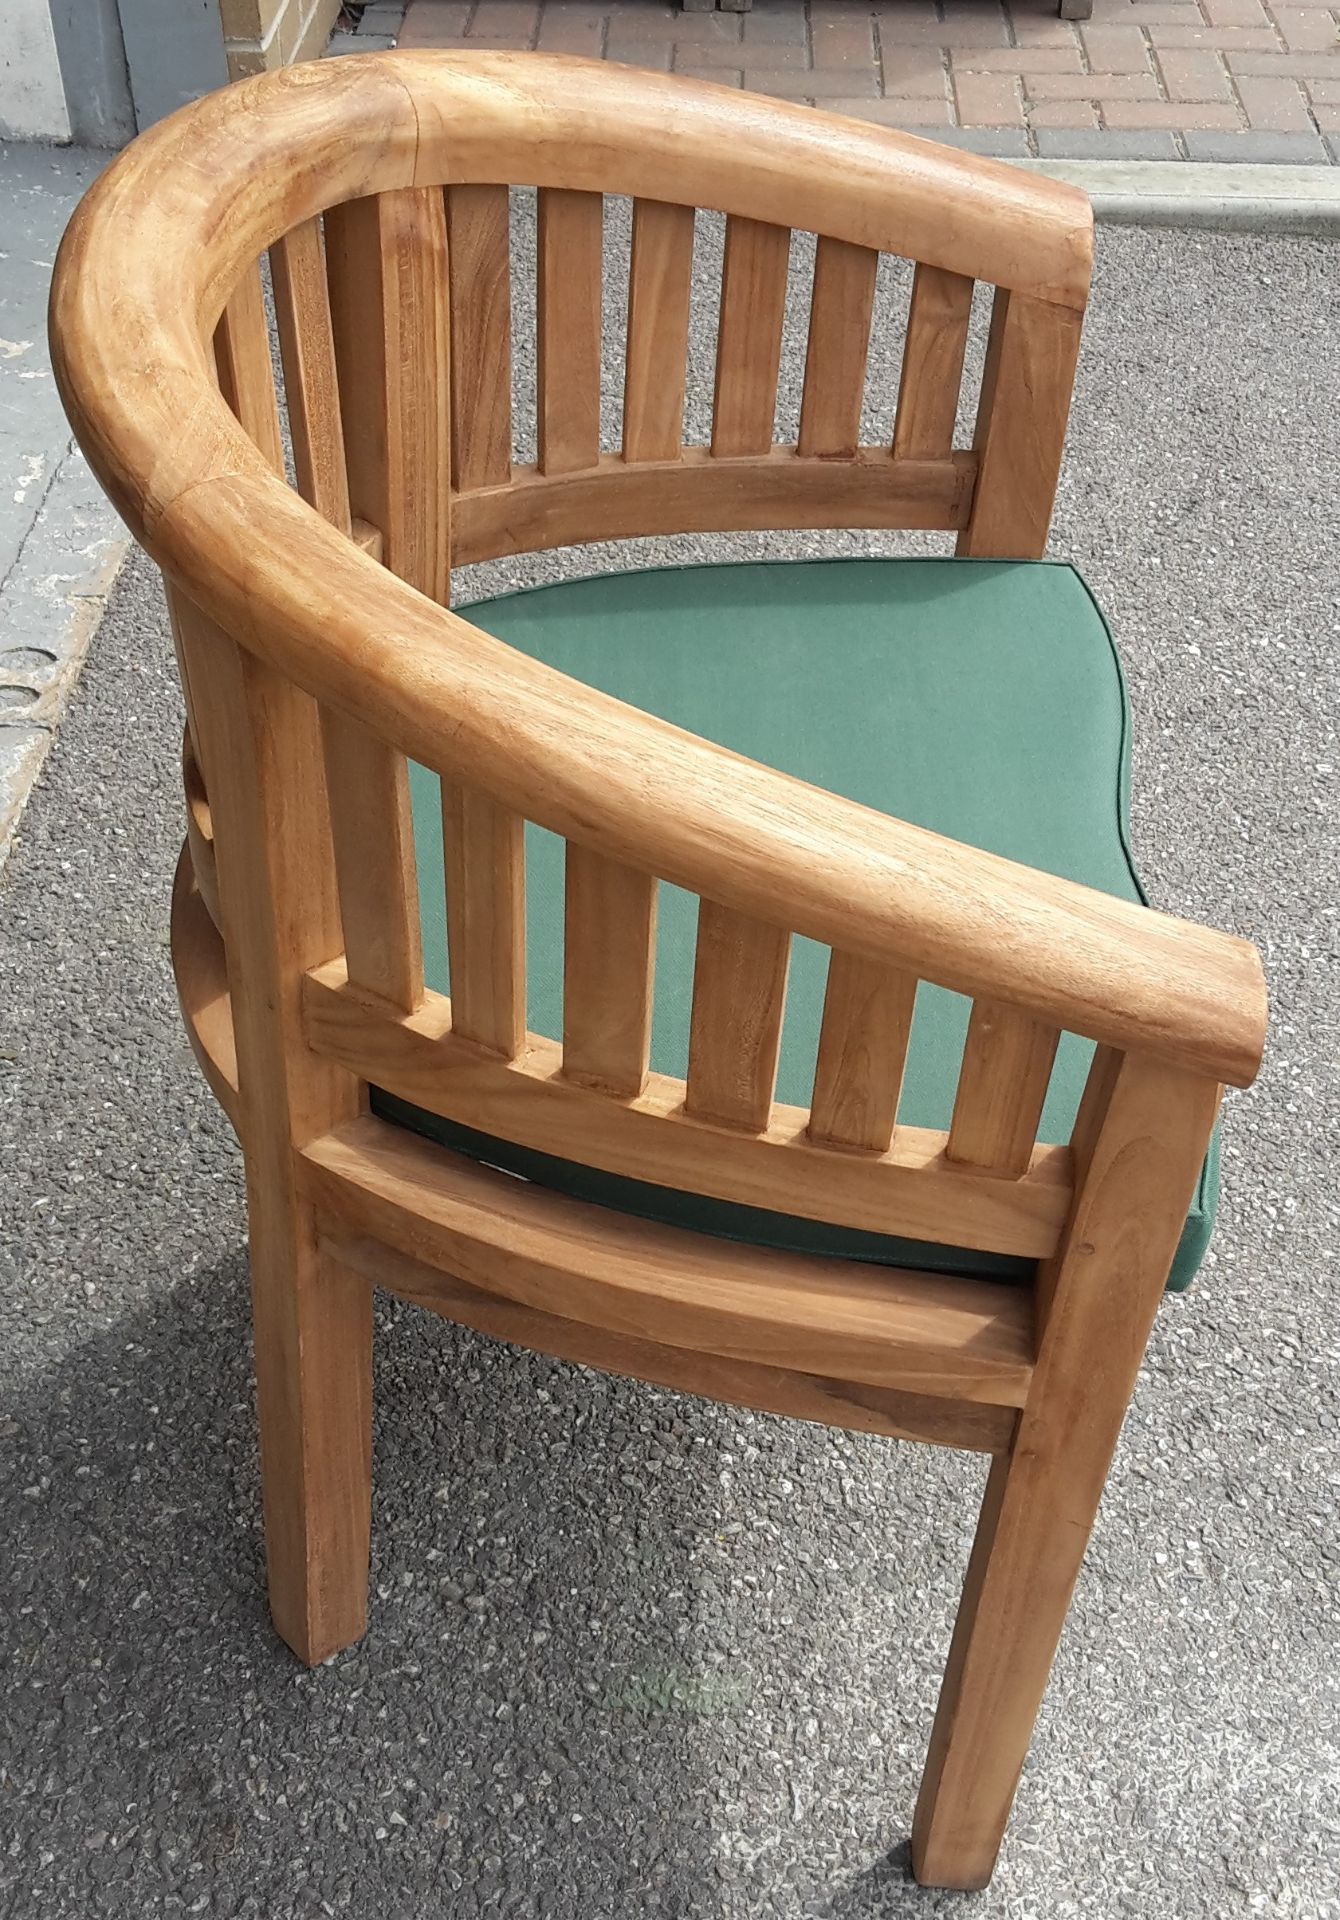 V Brand New TEAK Lutyens Garden Chair - Made From Grade A Plantation Teak RRP £199 NOTE: Item Is - Image 5 of 5